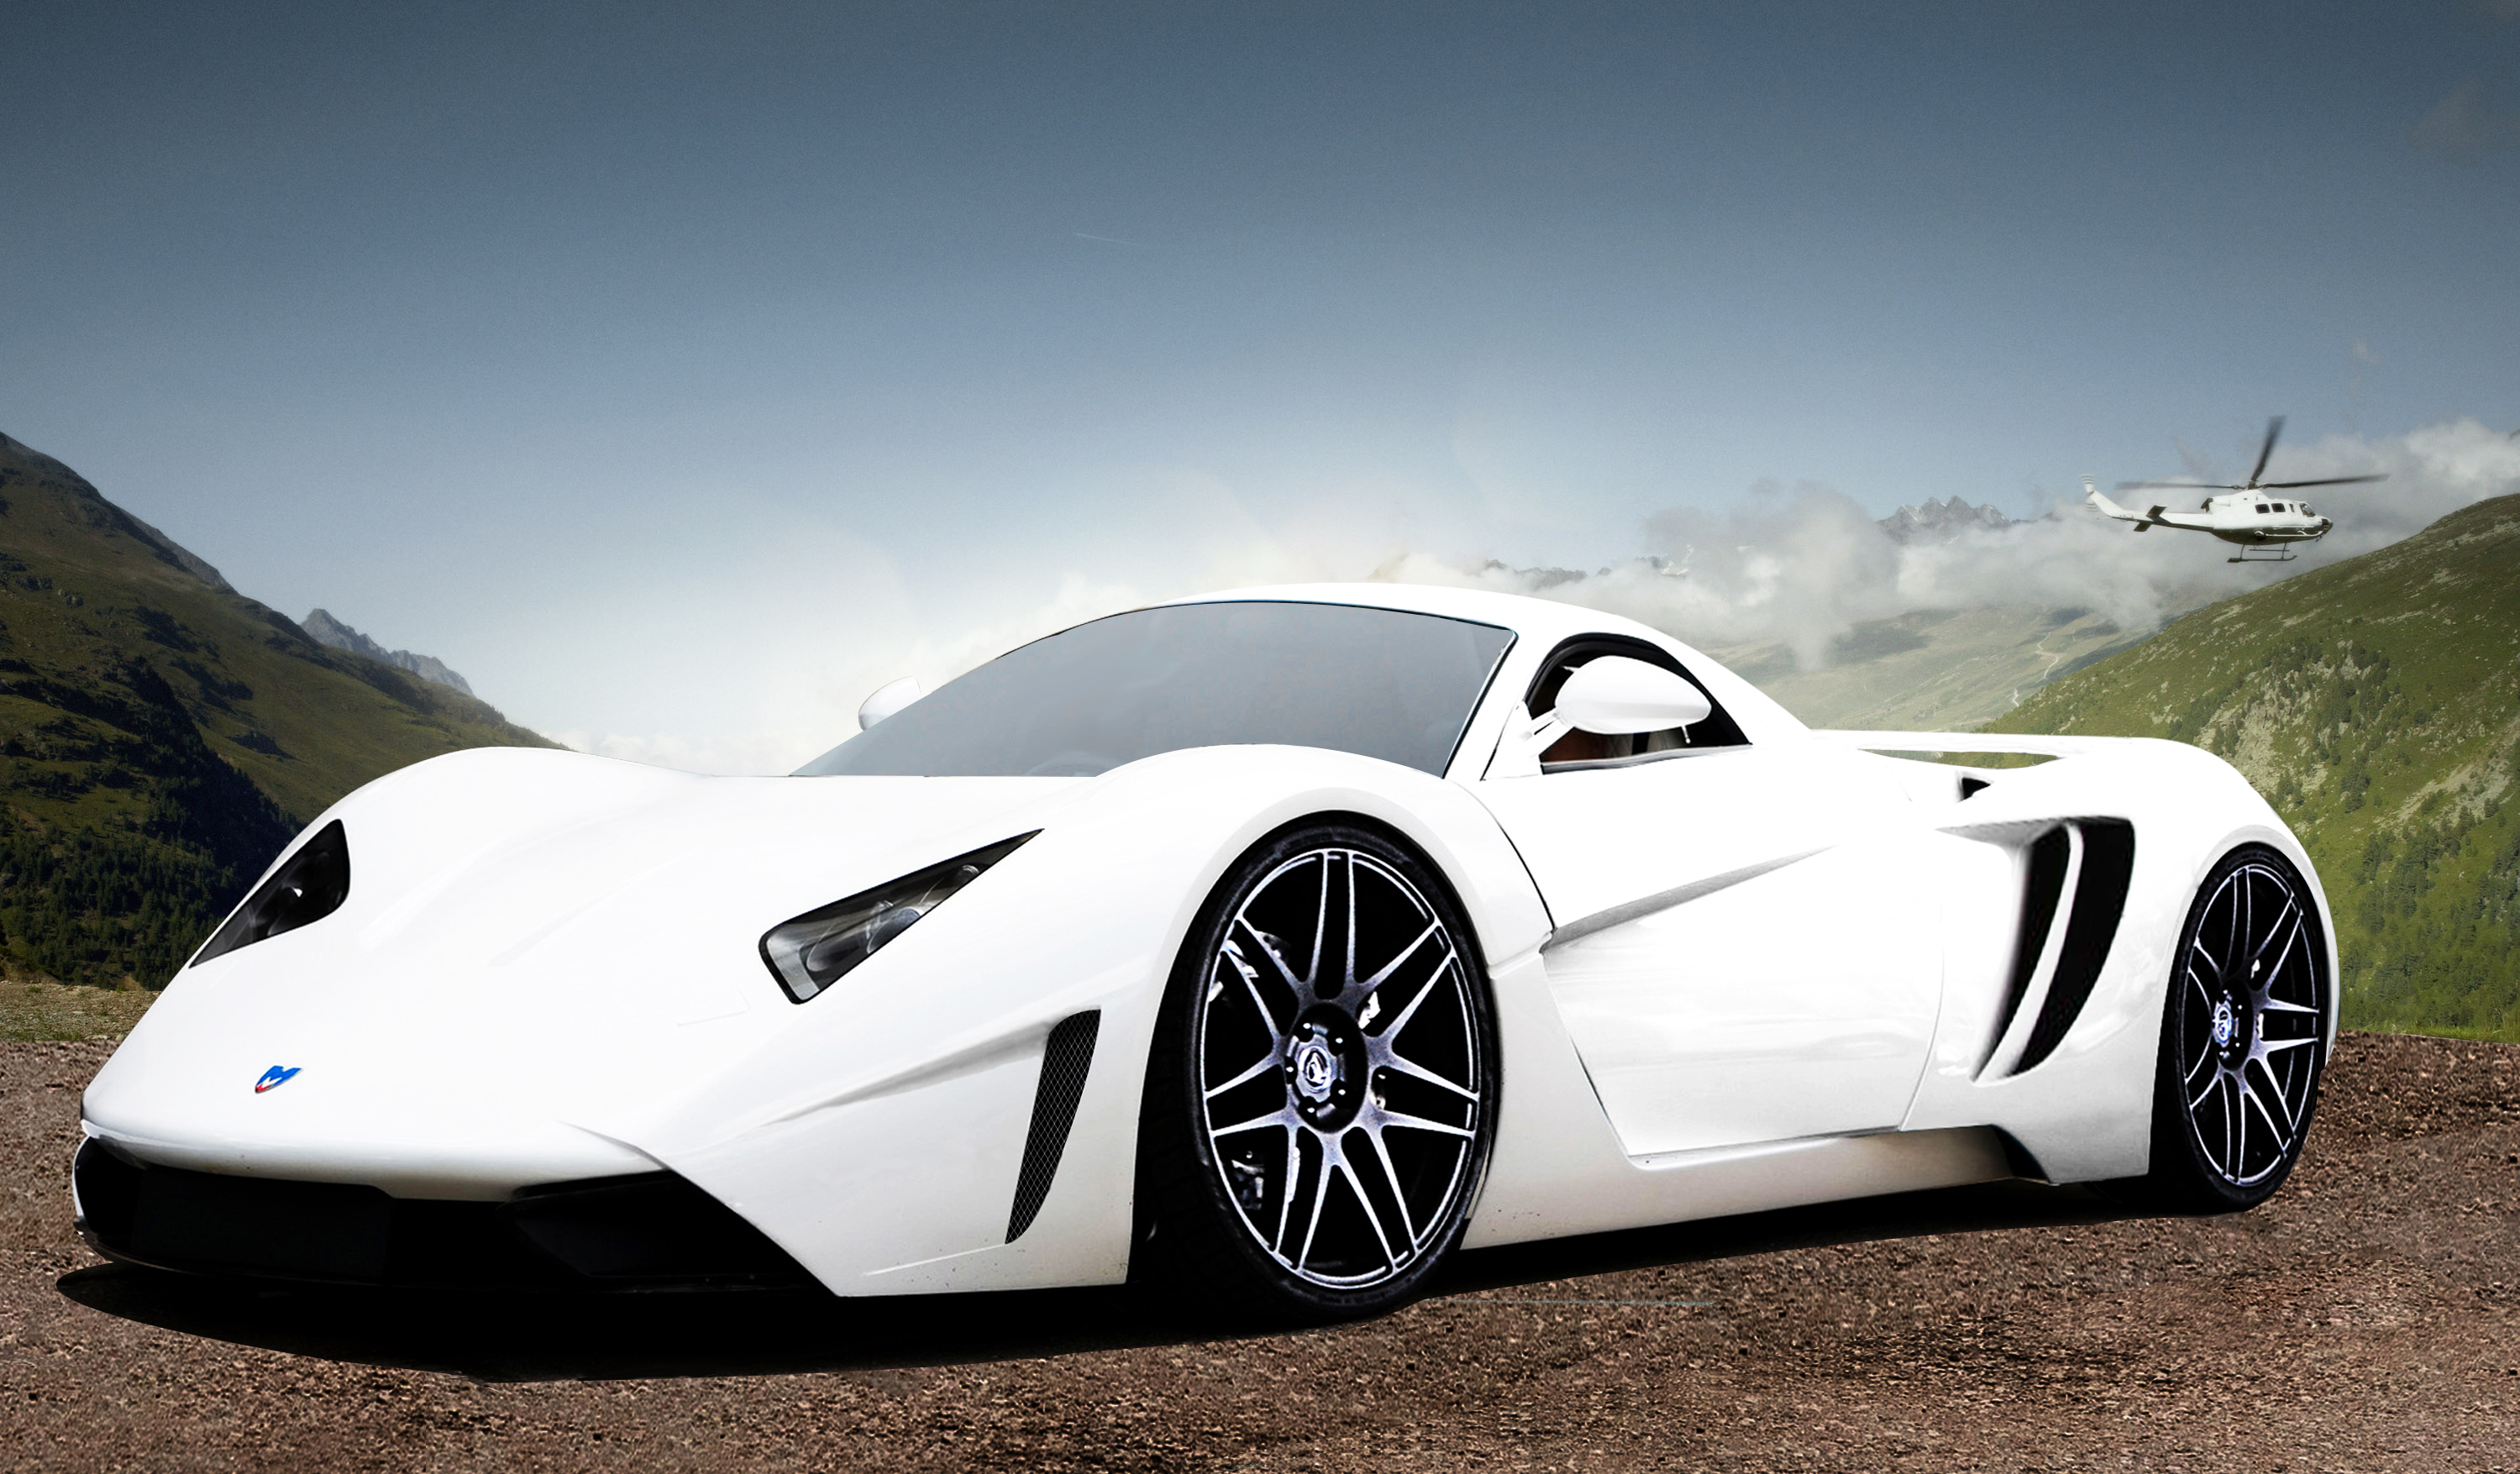 Marussia B1 Pixshark Image Galleries With A Bite